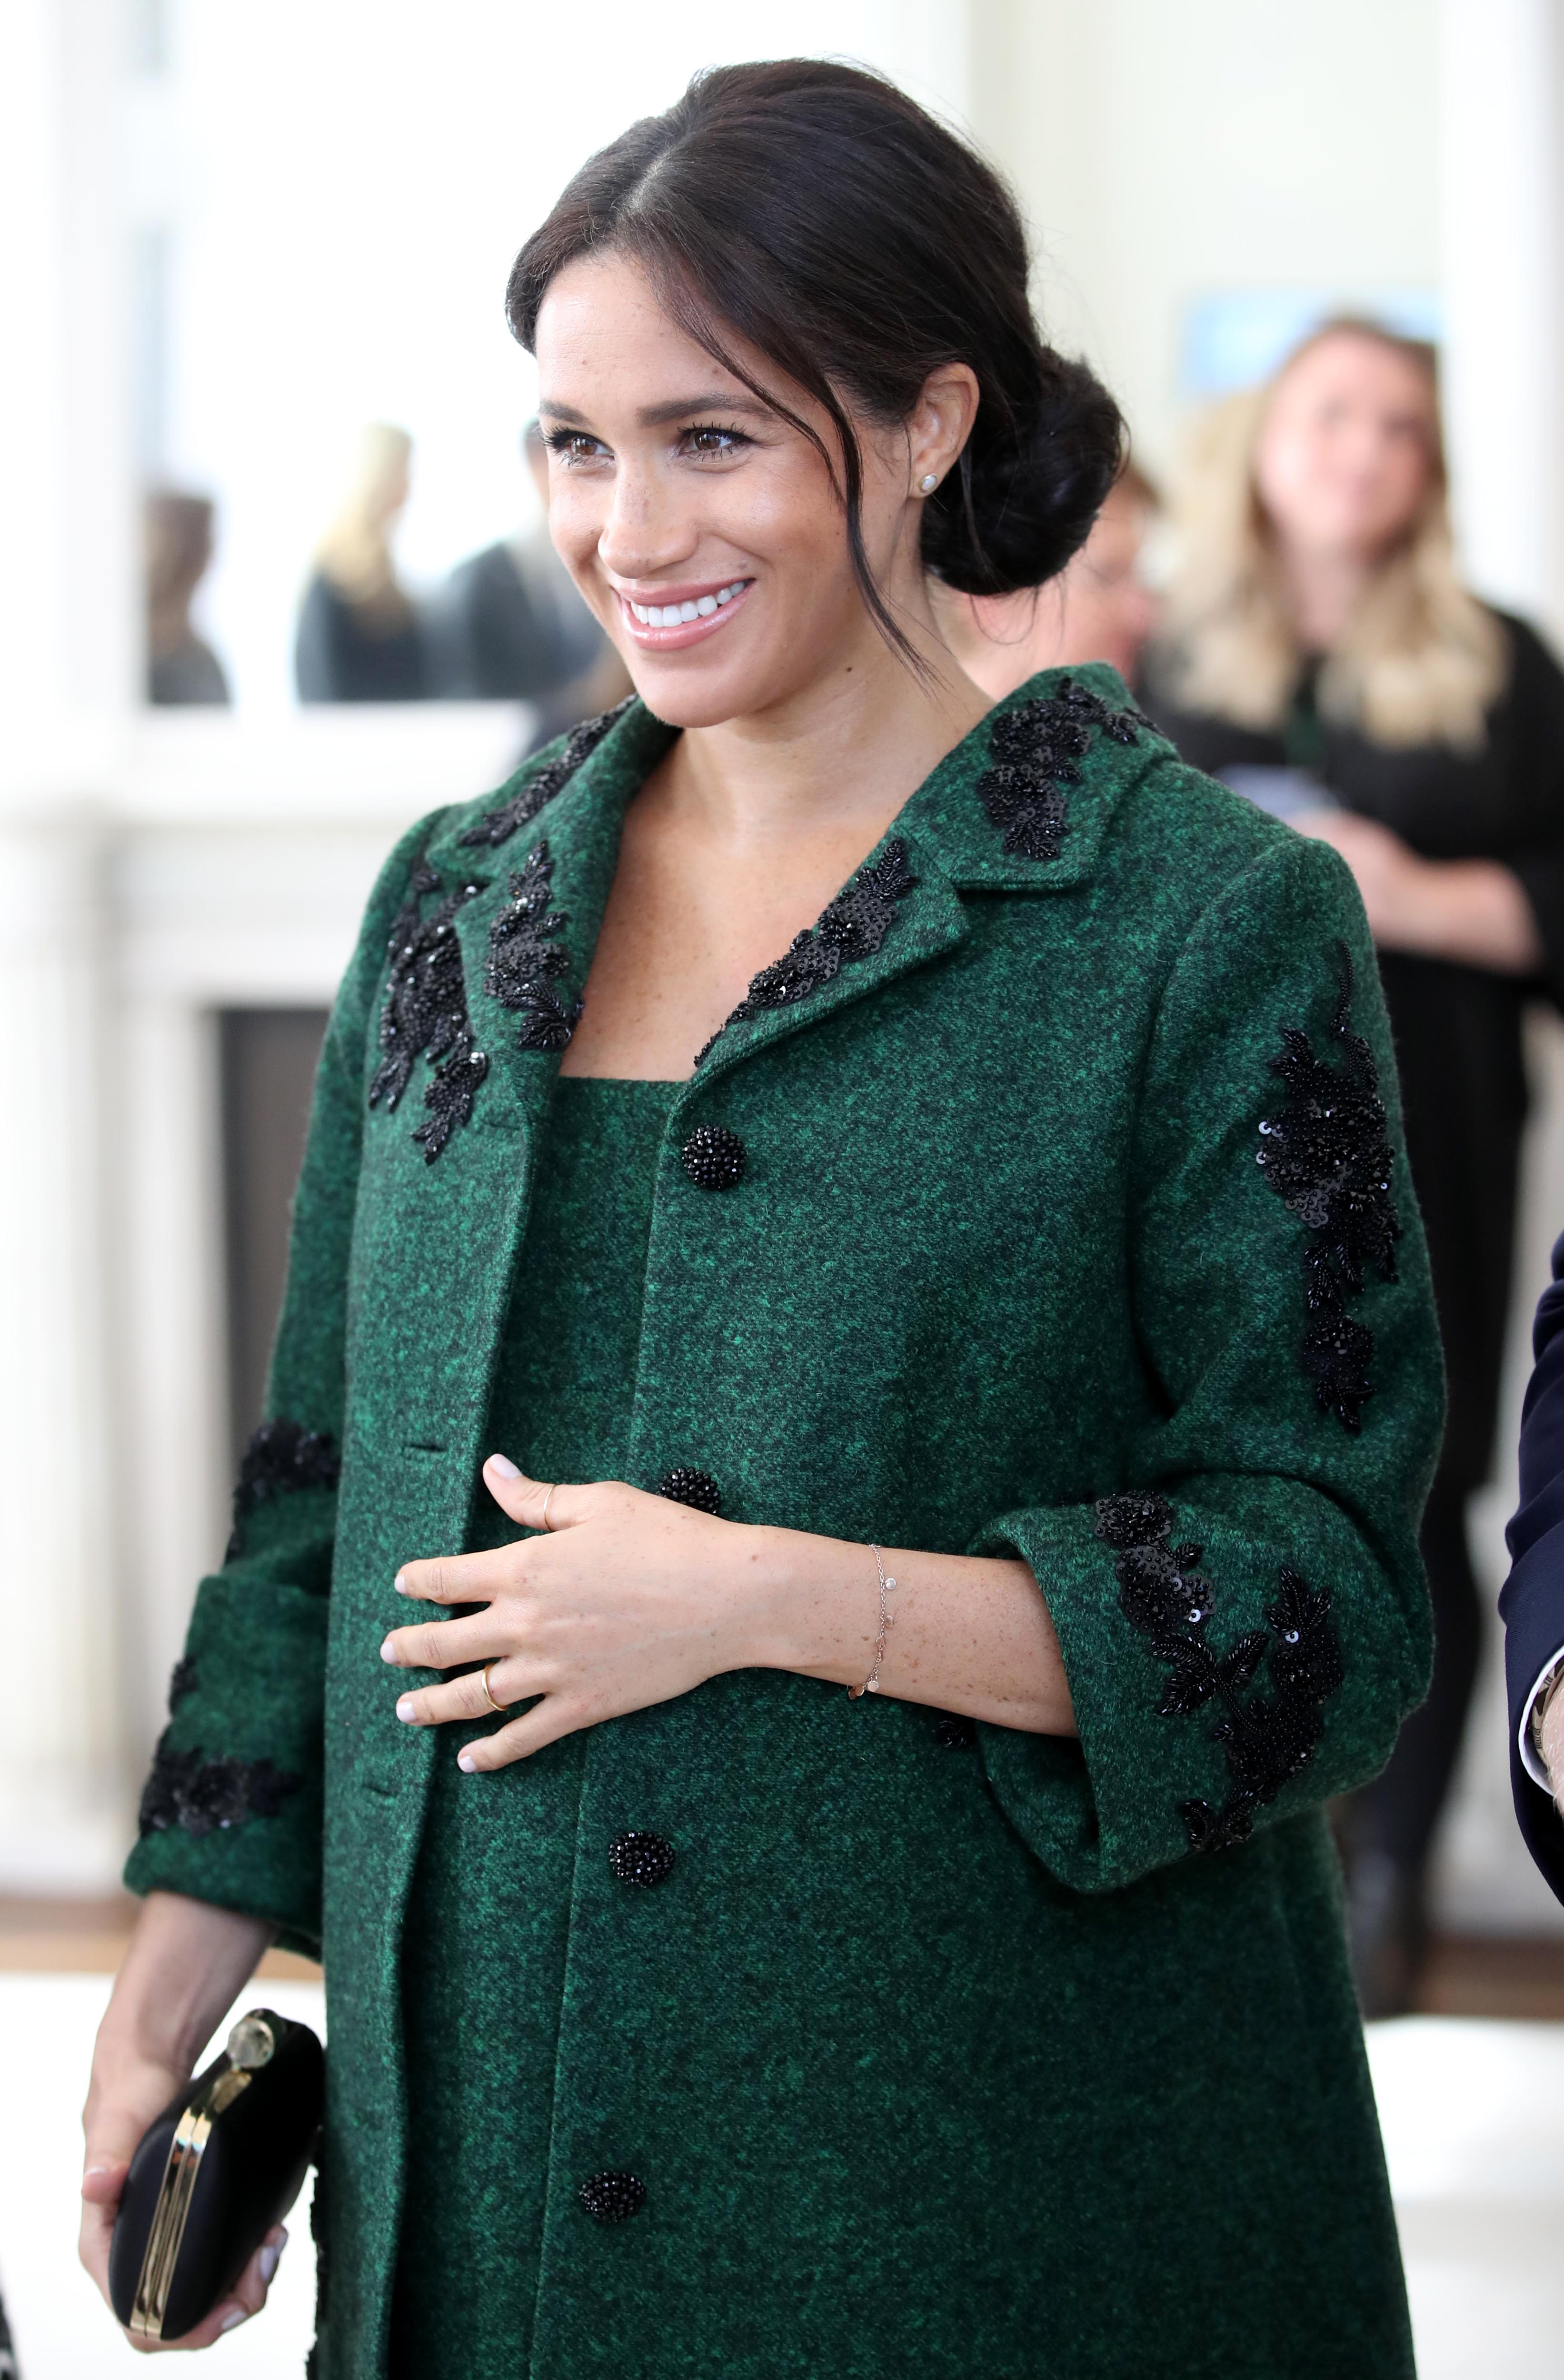 Meghan, Duchess of Sussex attends a Commonwealth Day Youth Event at Canada House with Prince Harry, Duke of Sussex on March 11, 2019 in London, England. | Source: Getty Images